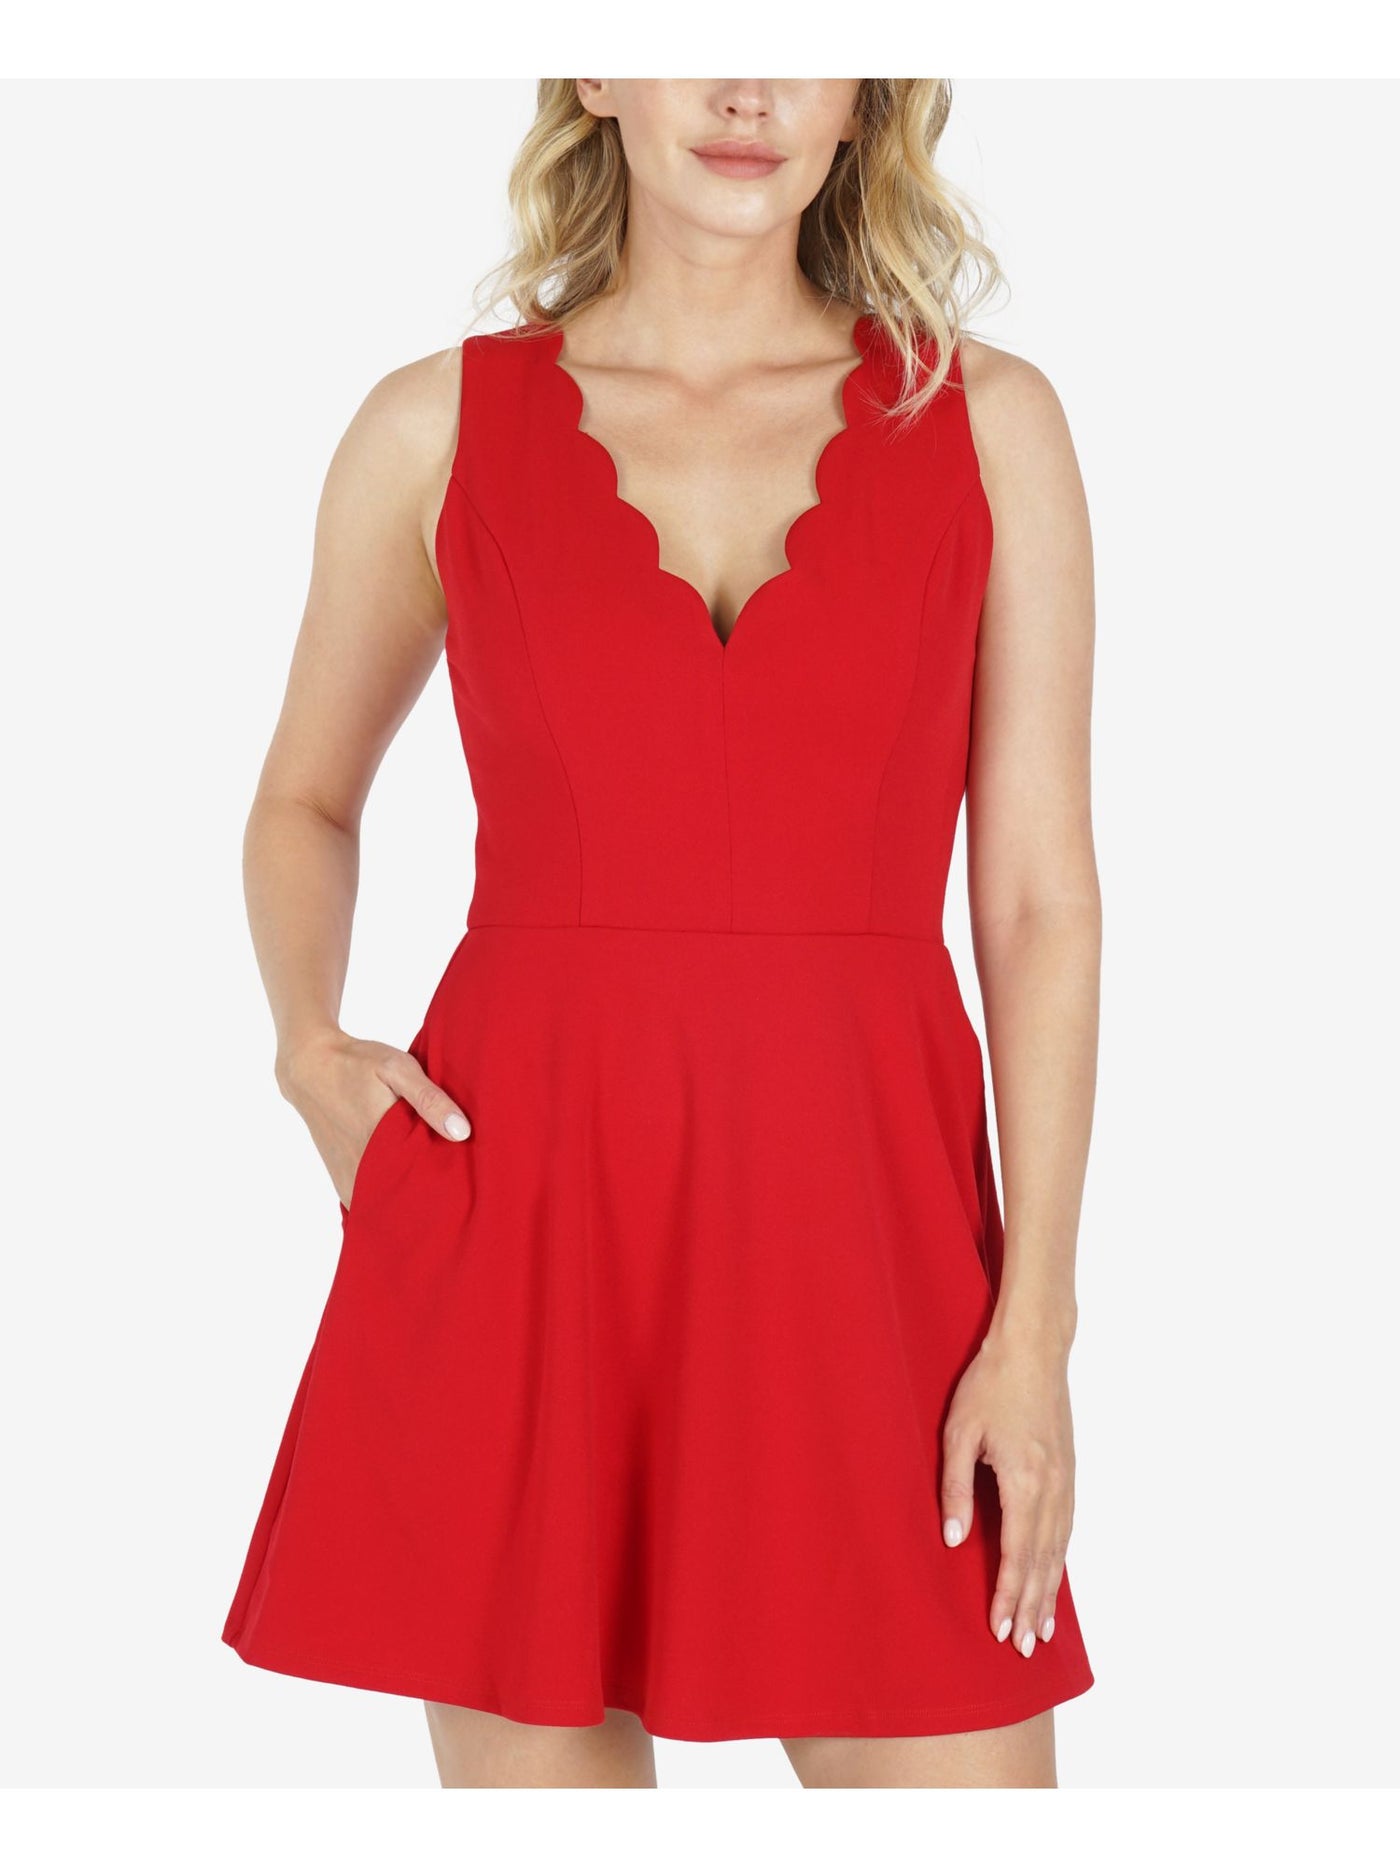 SPEECHLESS Womens Red Pocketed Scalloped Sleeveless V Neck Short Party Fit + Flare Dress Juniors XL